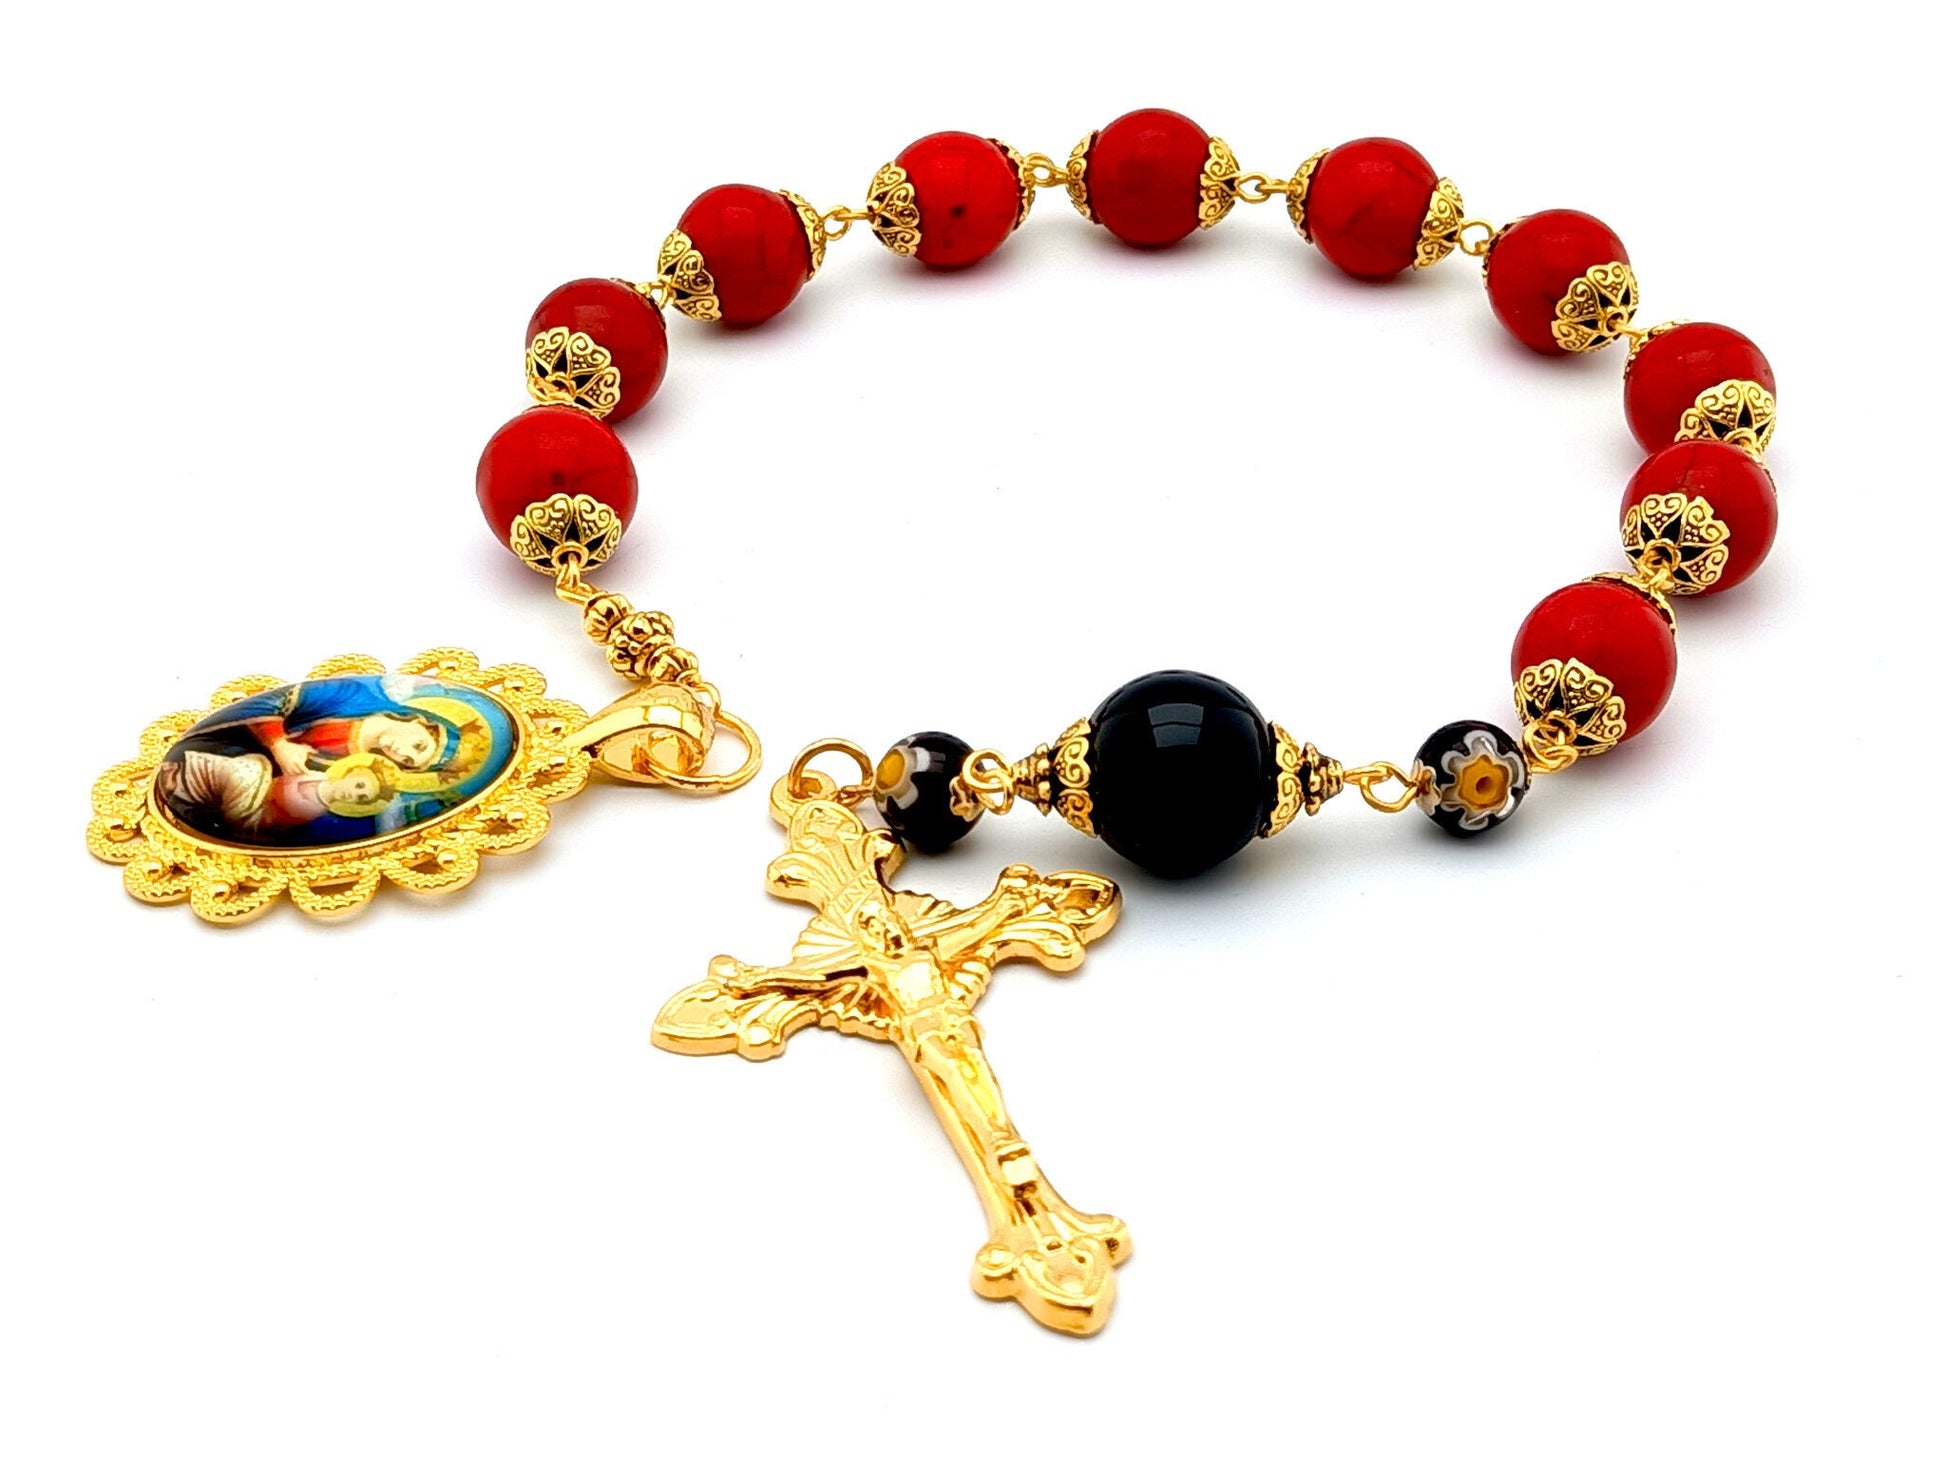 Our Lady of Perpetual Help unique rosary beads single decade rosary with red gemstone and onyx beads, golden sunburst crucifix and picture end medal.